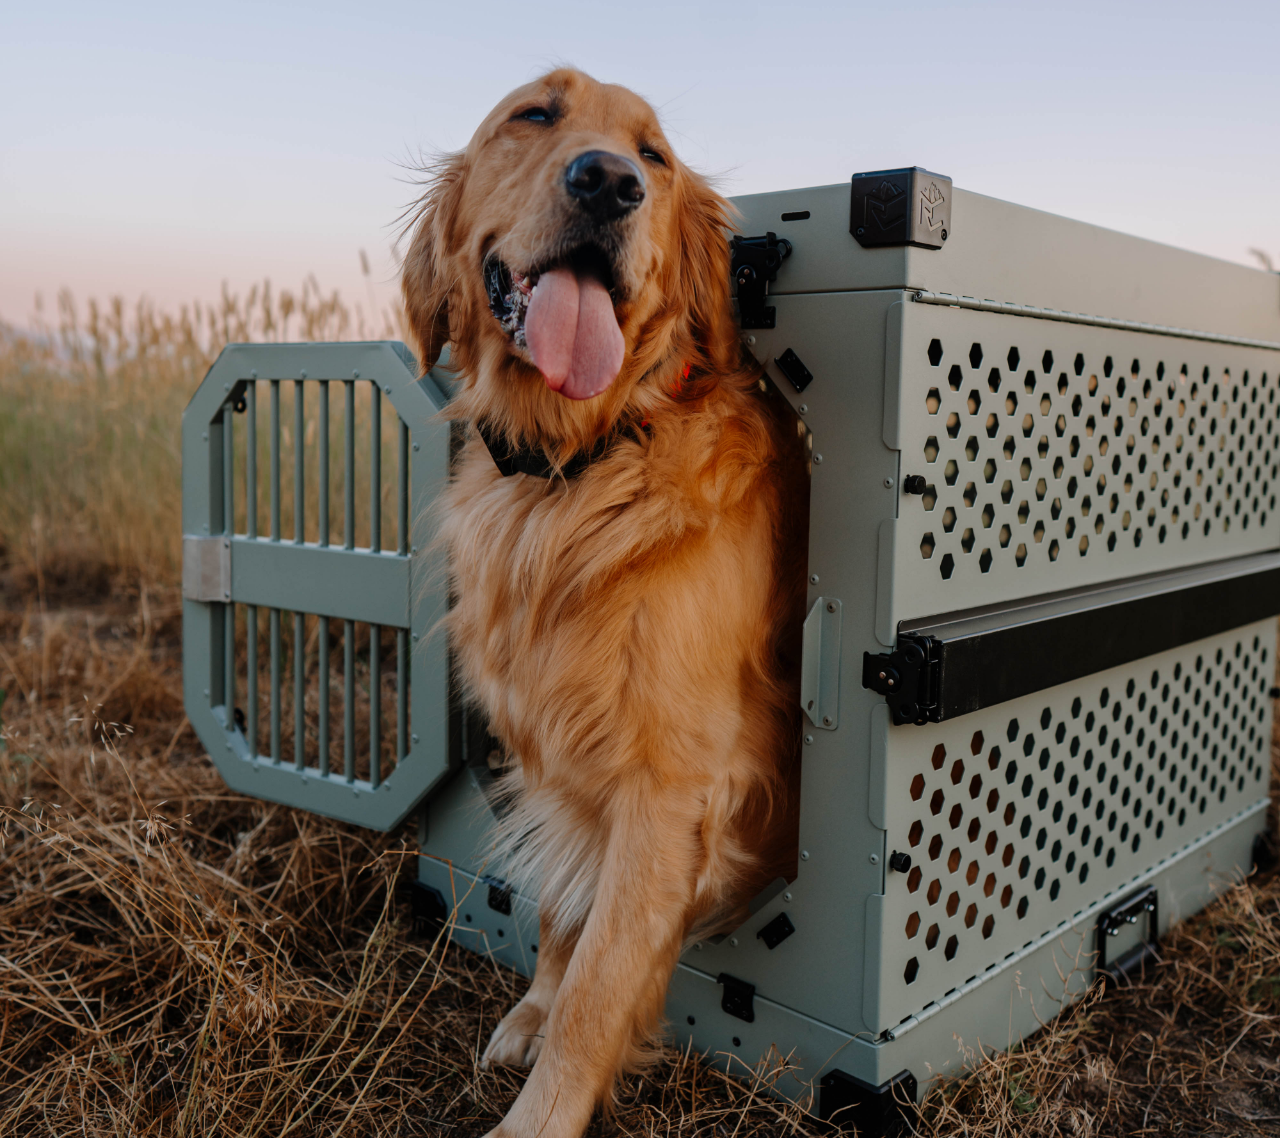 Sage Green collapsible dog crate by Rock Creek Crates with a Golden Retriever inside